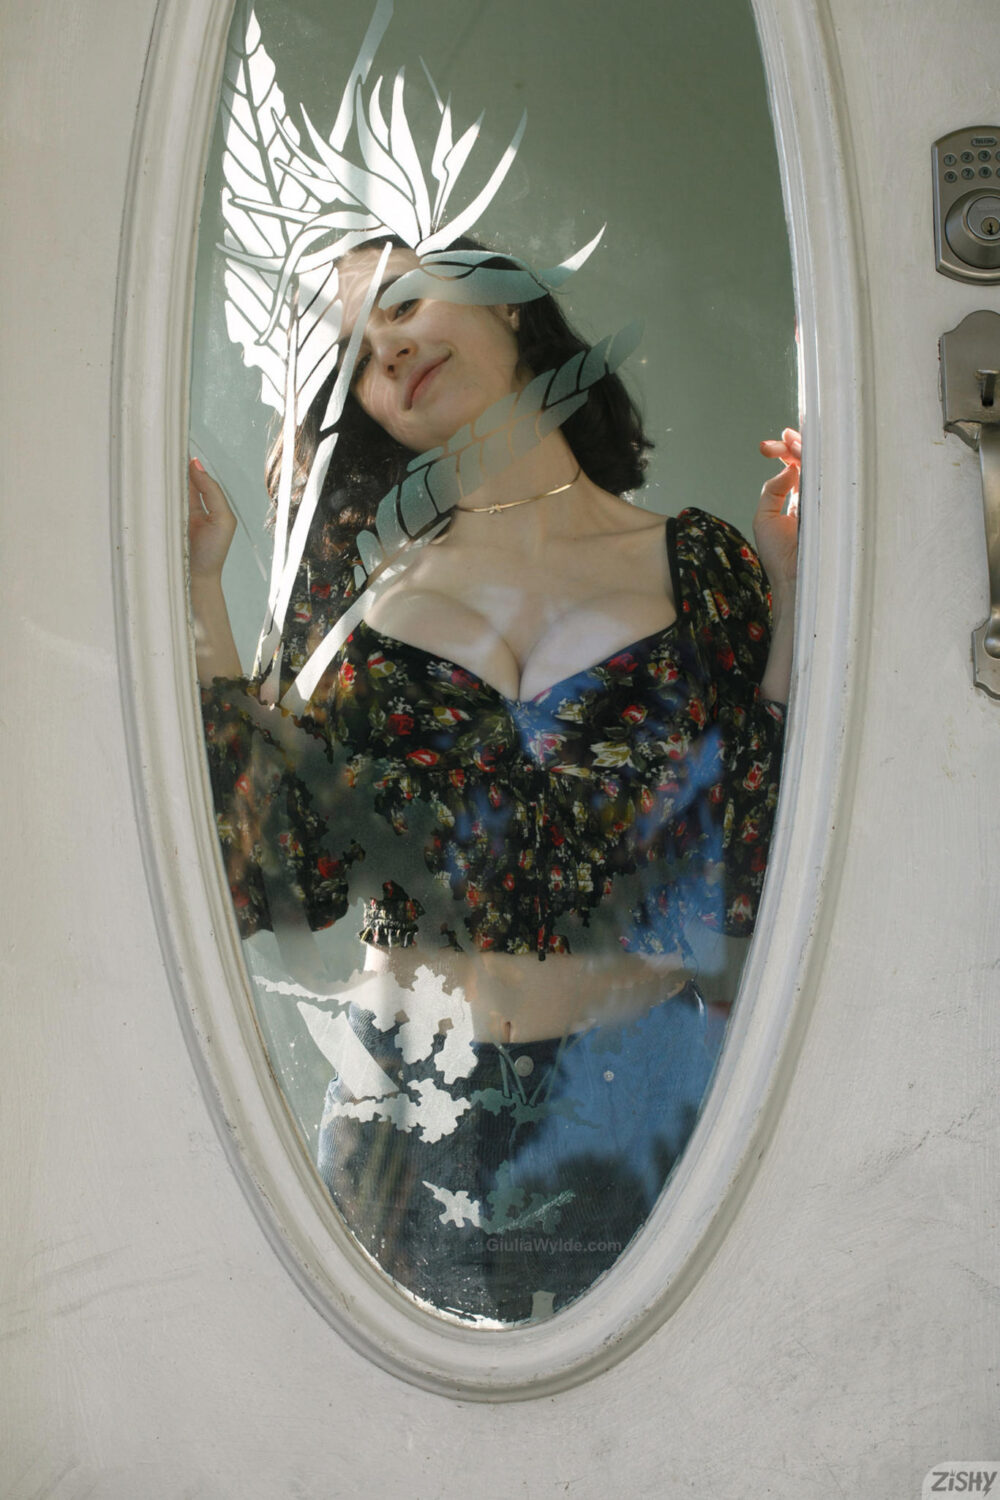 Busty model pressing her boobs on glass